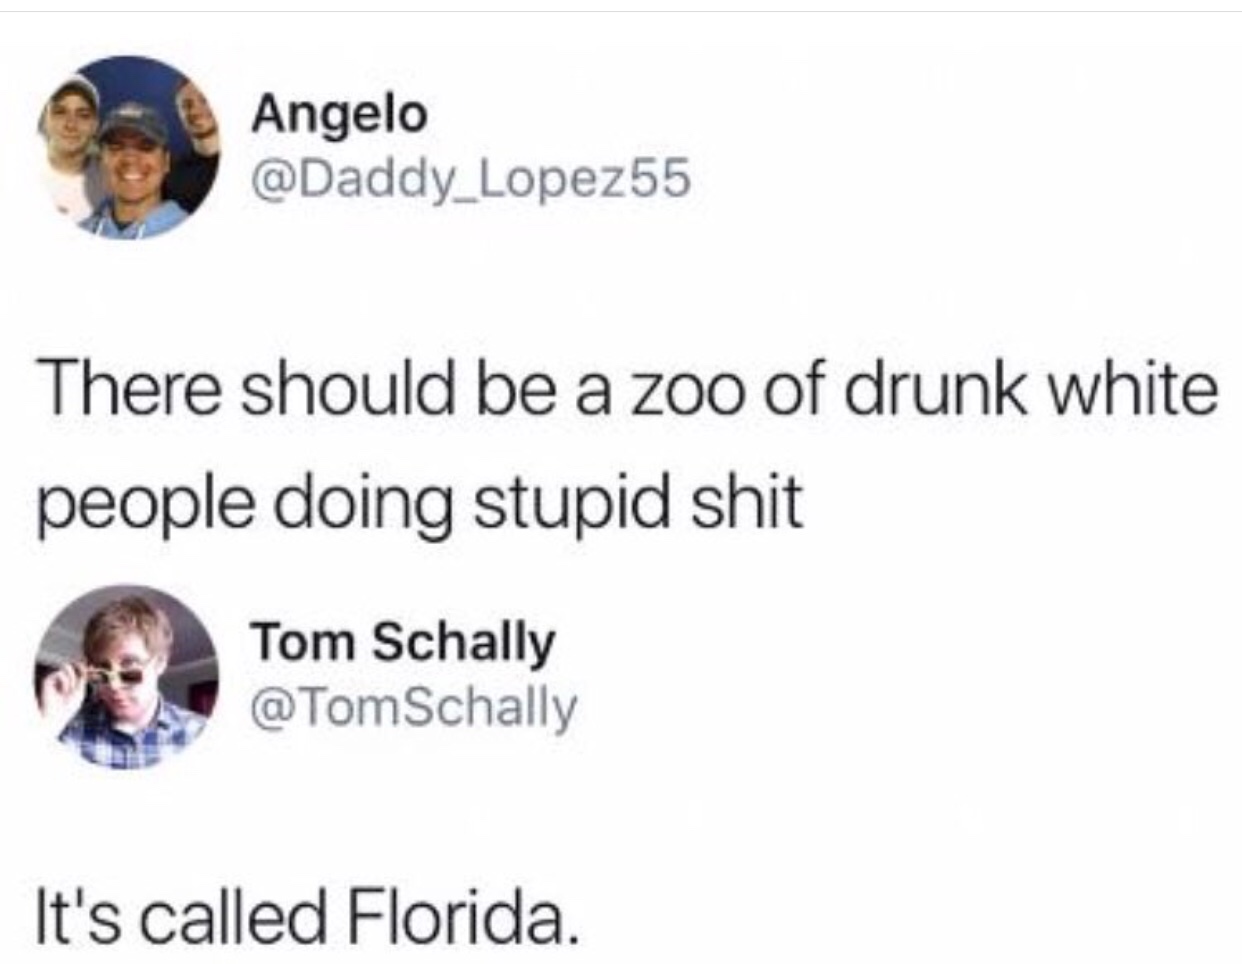 memes - there should be a zoo of drunk white people - Angelo There should be a zoo of drunk white people doing stupid shit Tom Schally Schally It's called Florida.